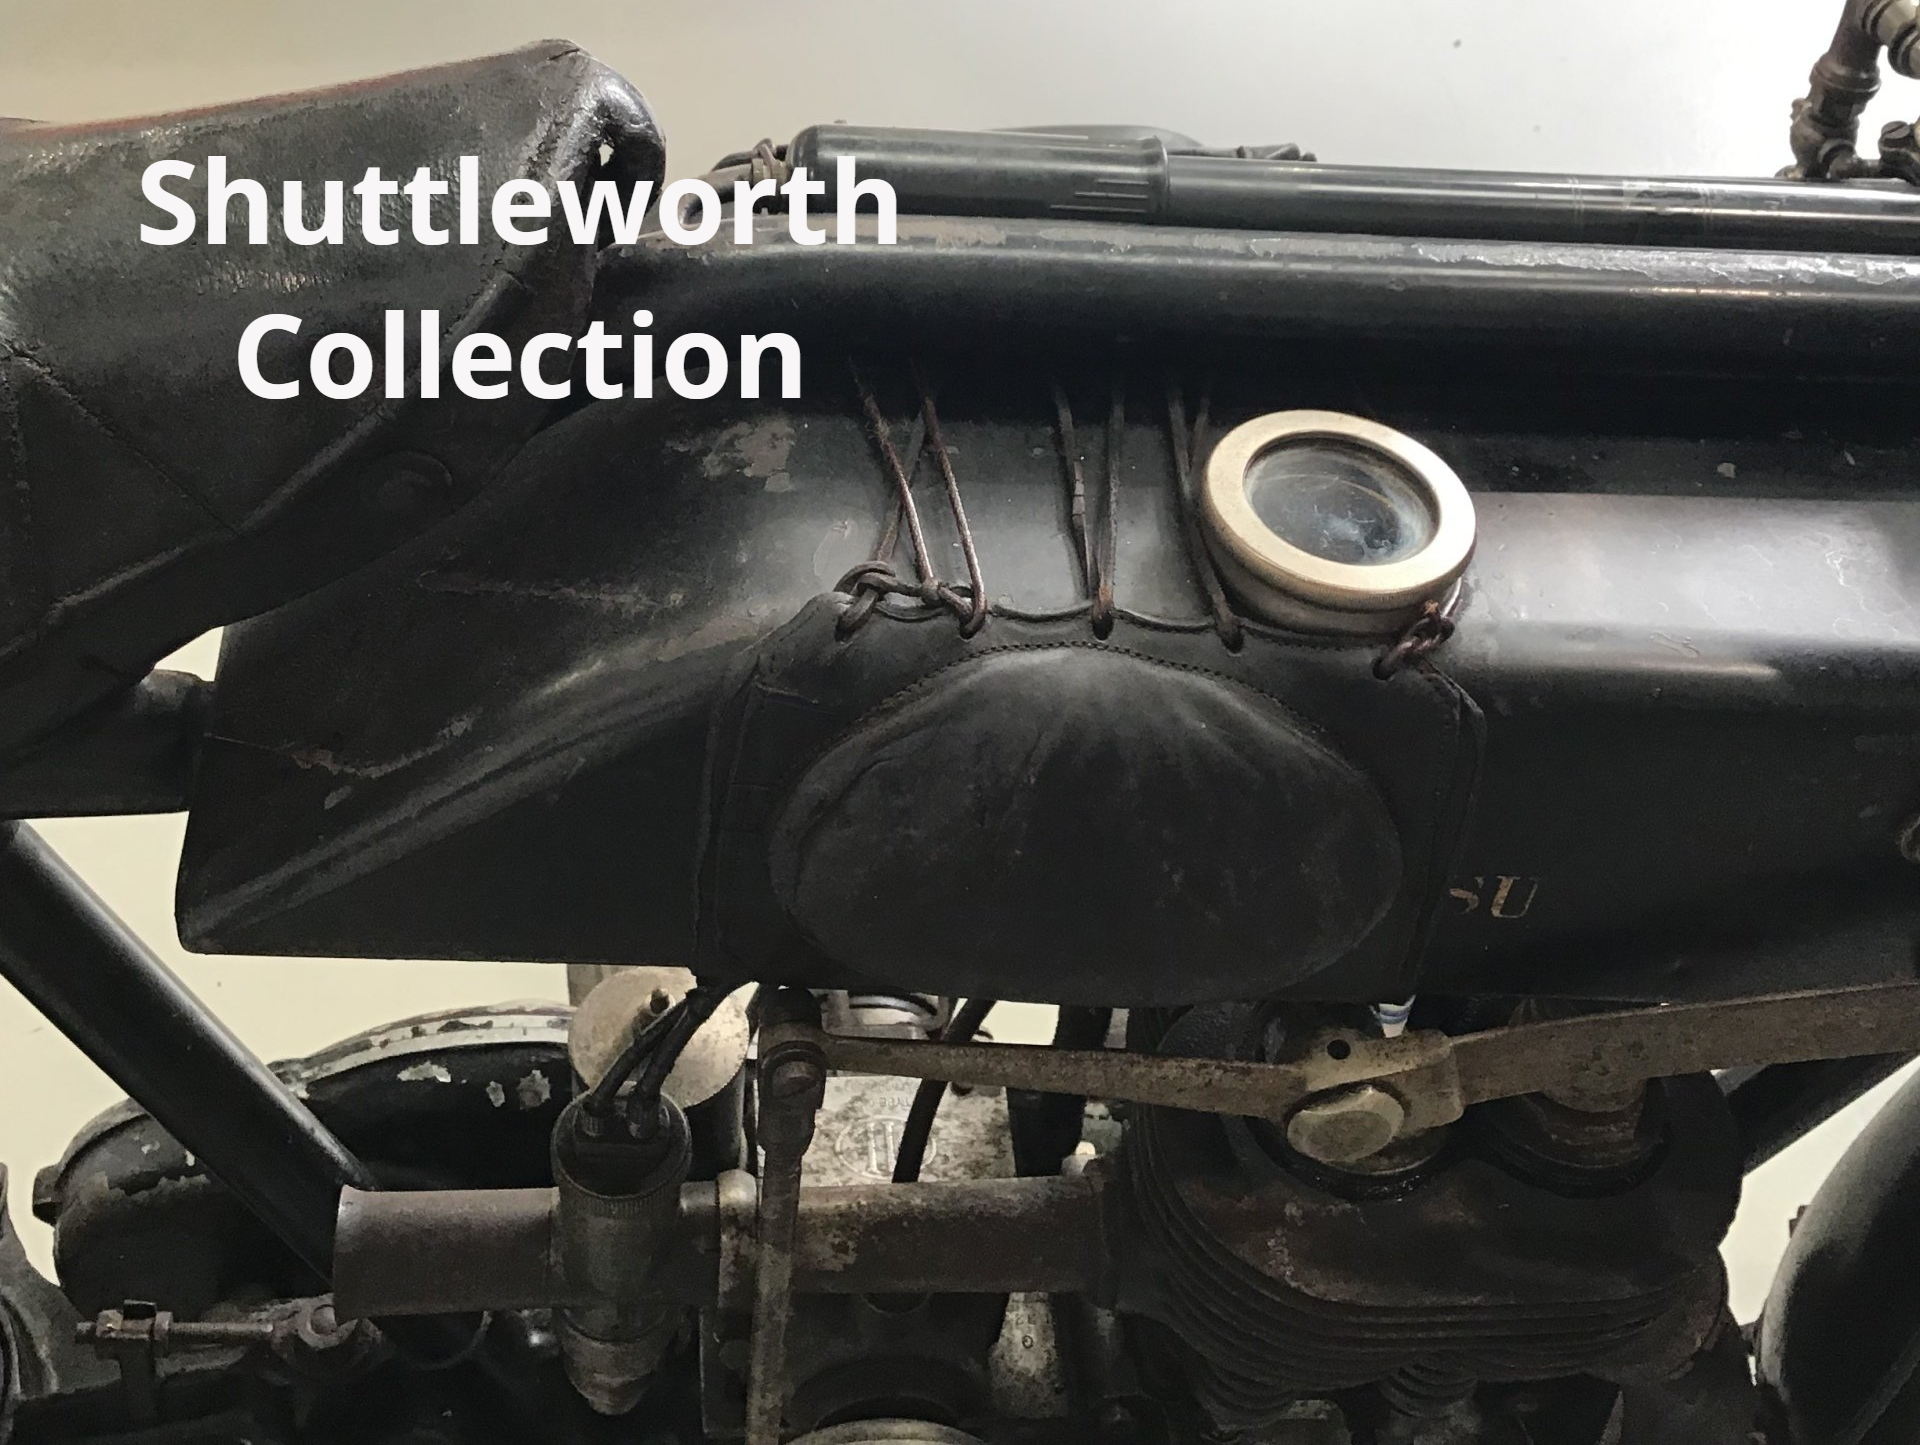 Bikes of the Shuttleworth Collection